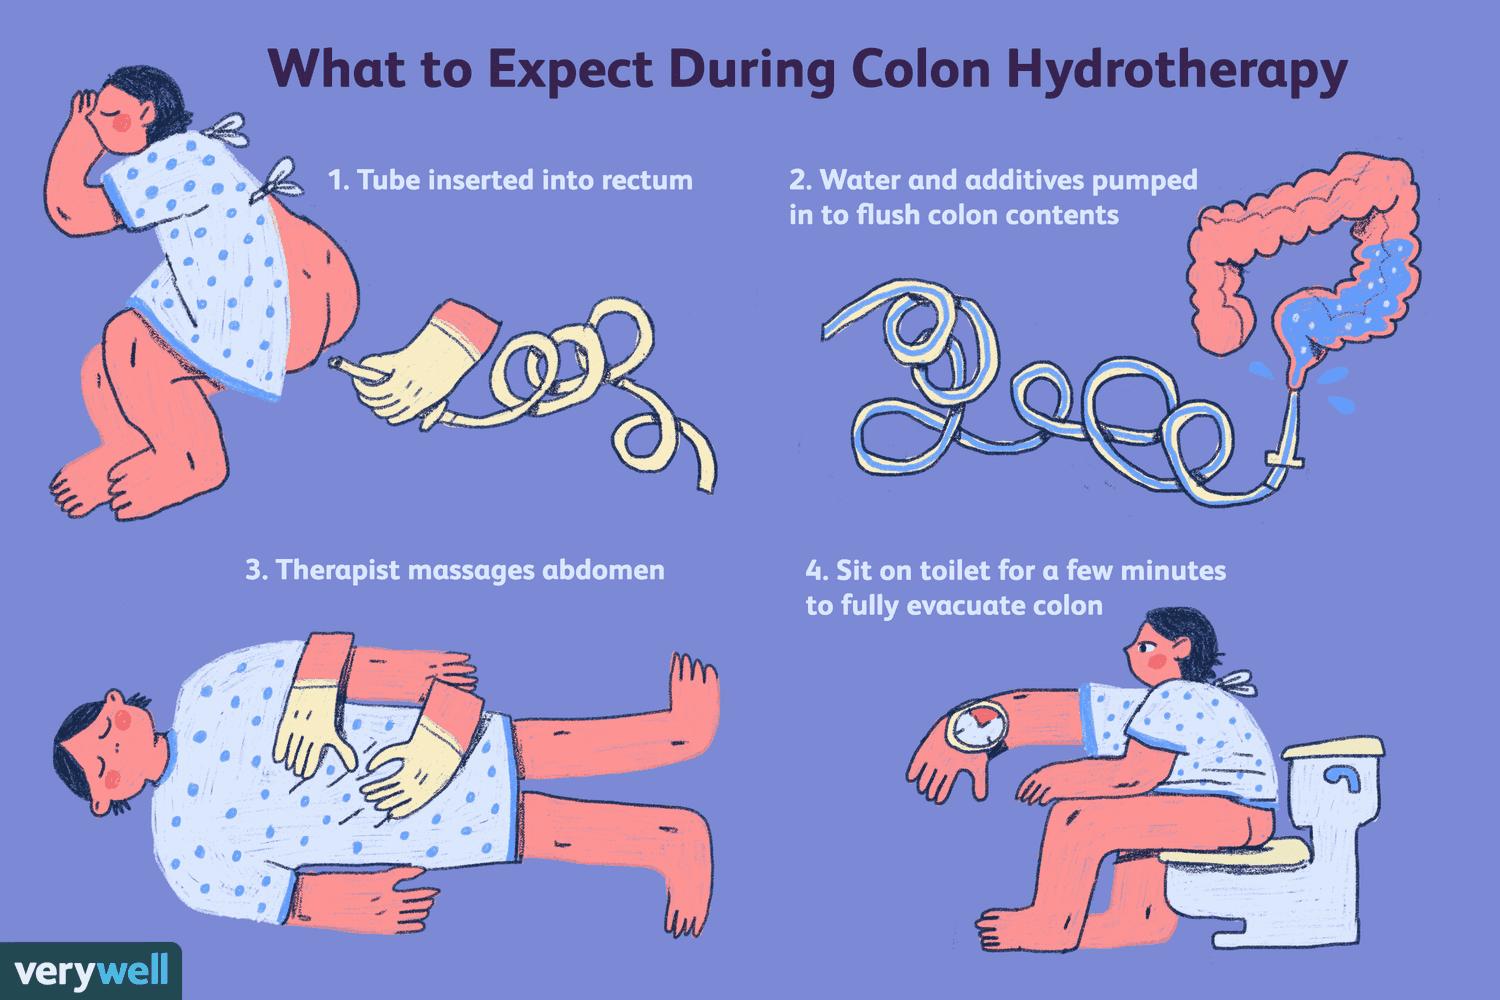 A person is receiving colon hydrotherapy, which involves a tube being inserted into the rectum to flush out the contents of the colon.